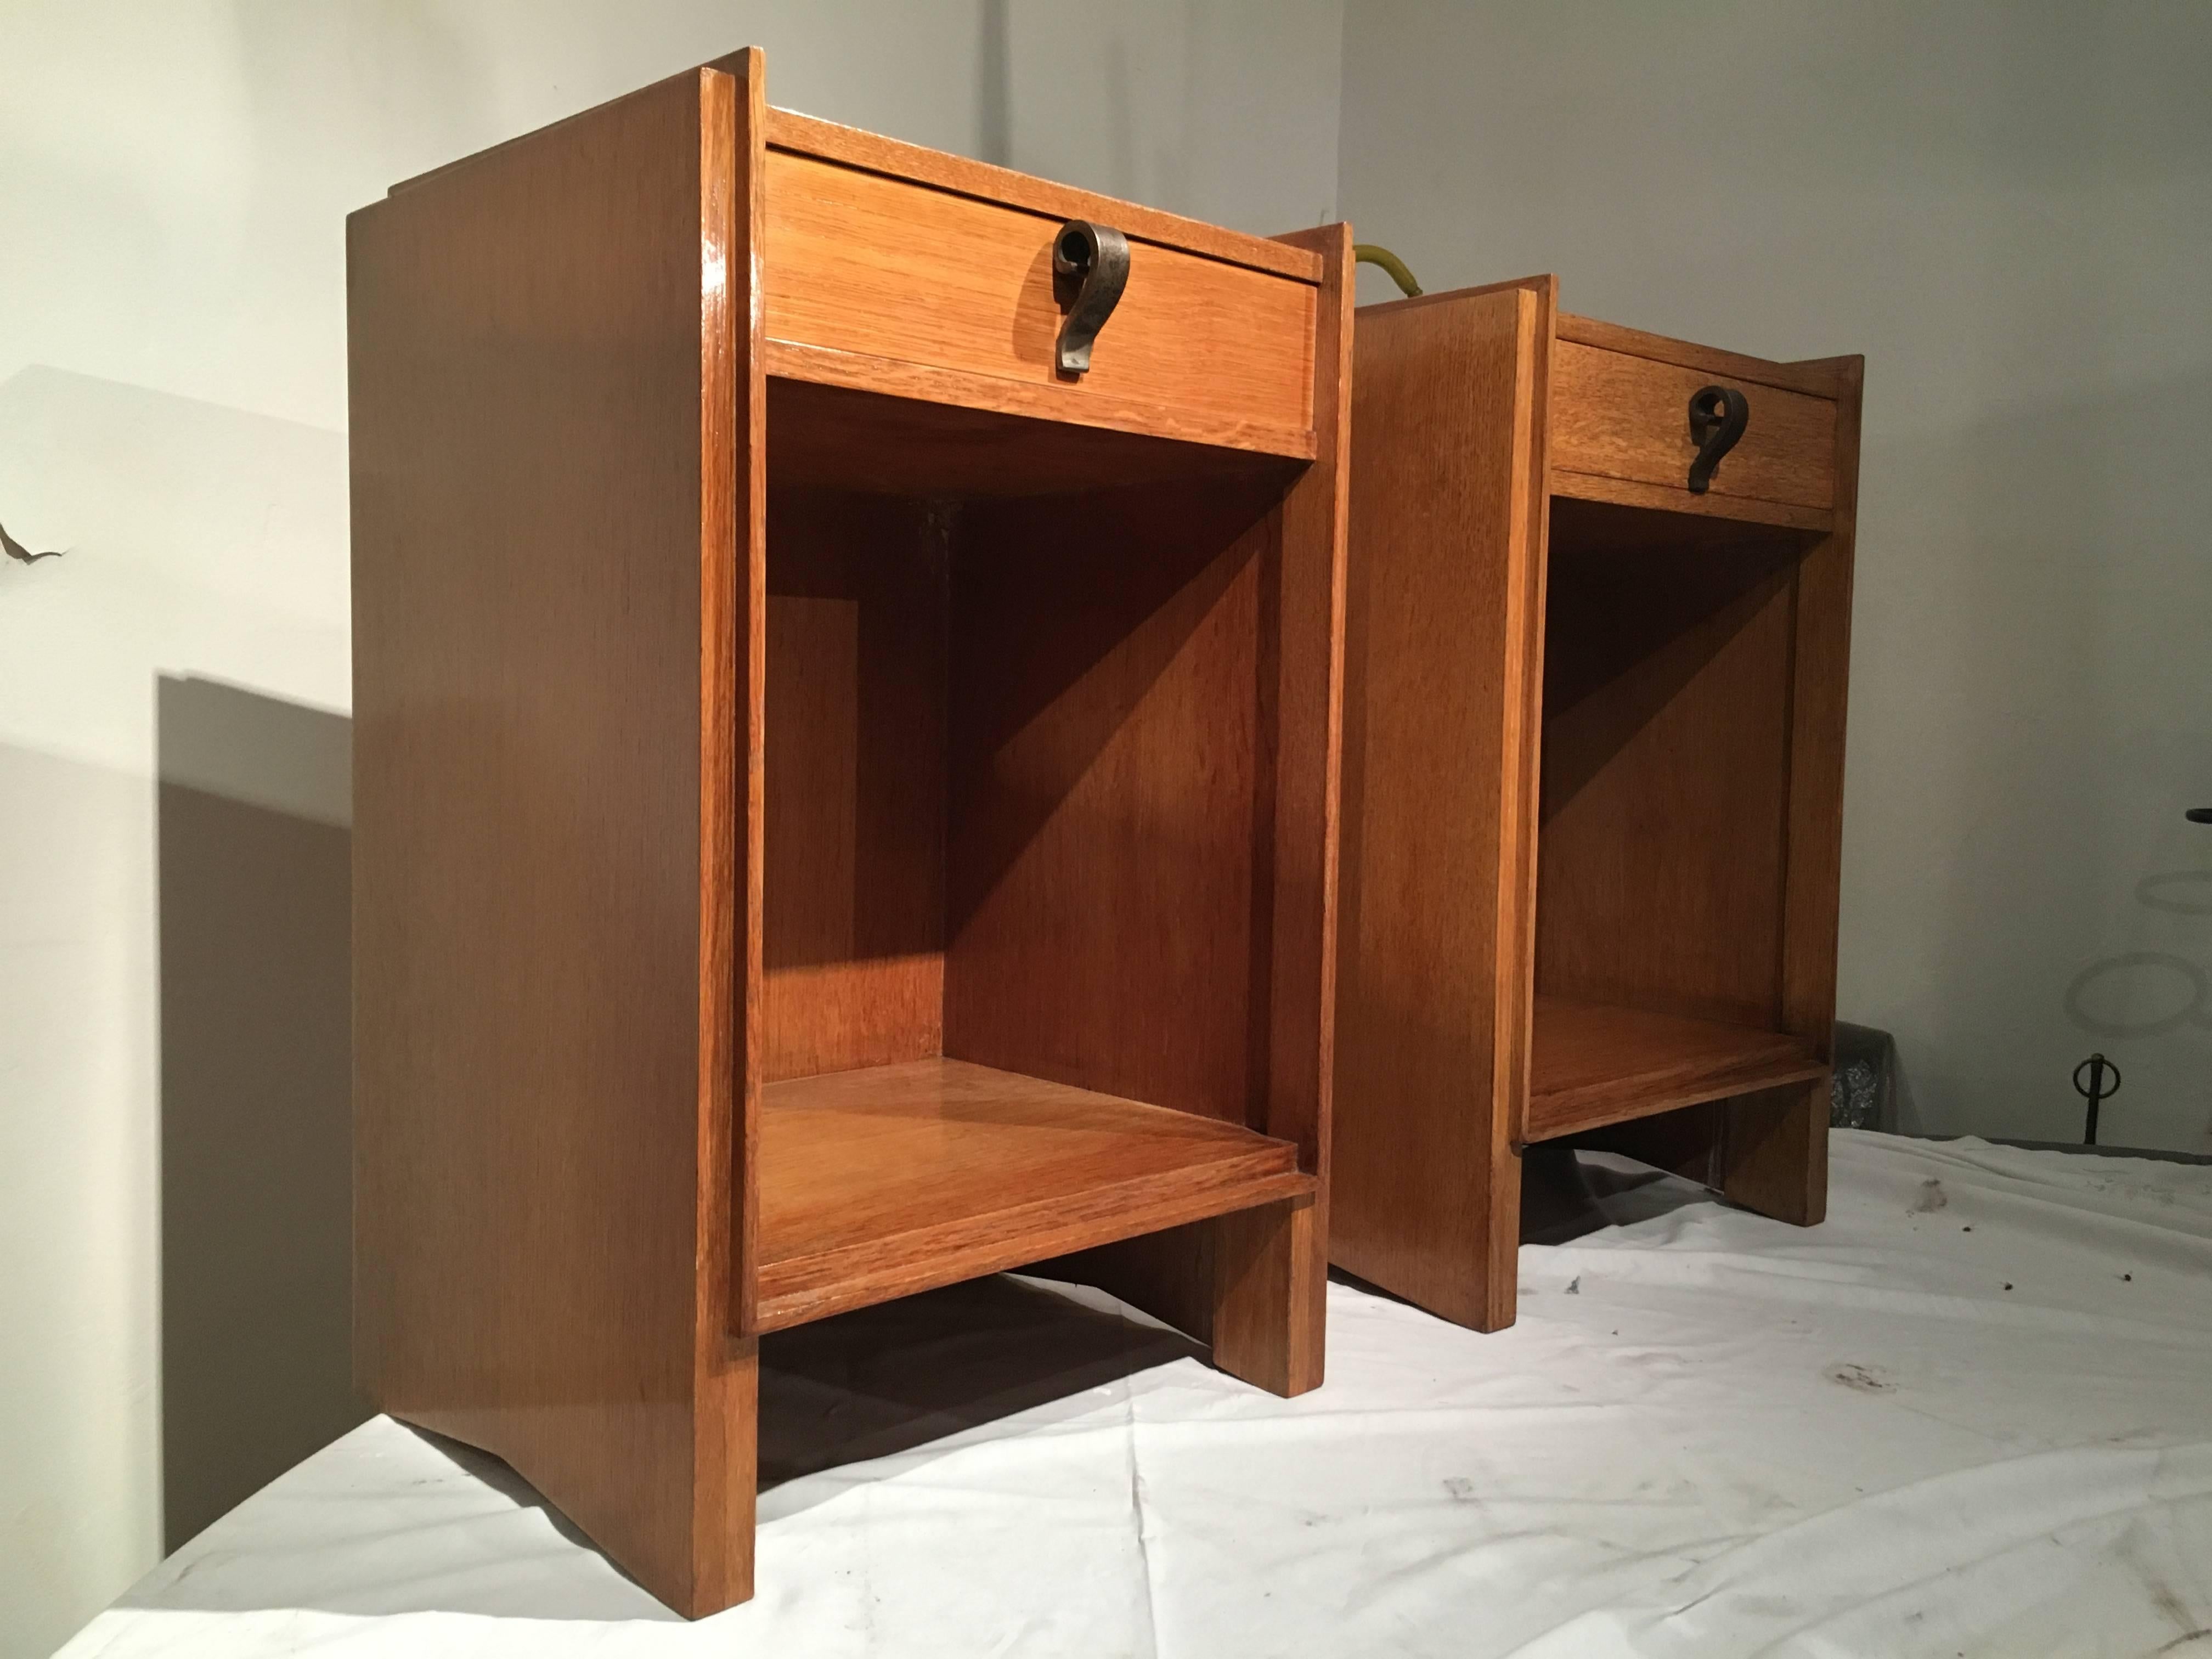 Maxime old pair of oak bedsides with pure design and original iron handle.